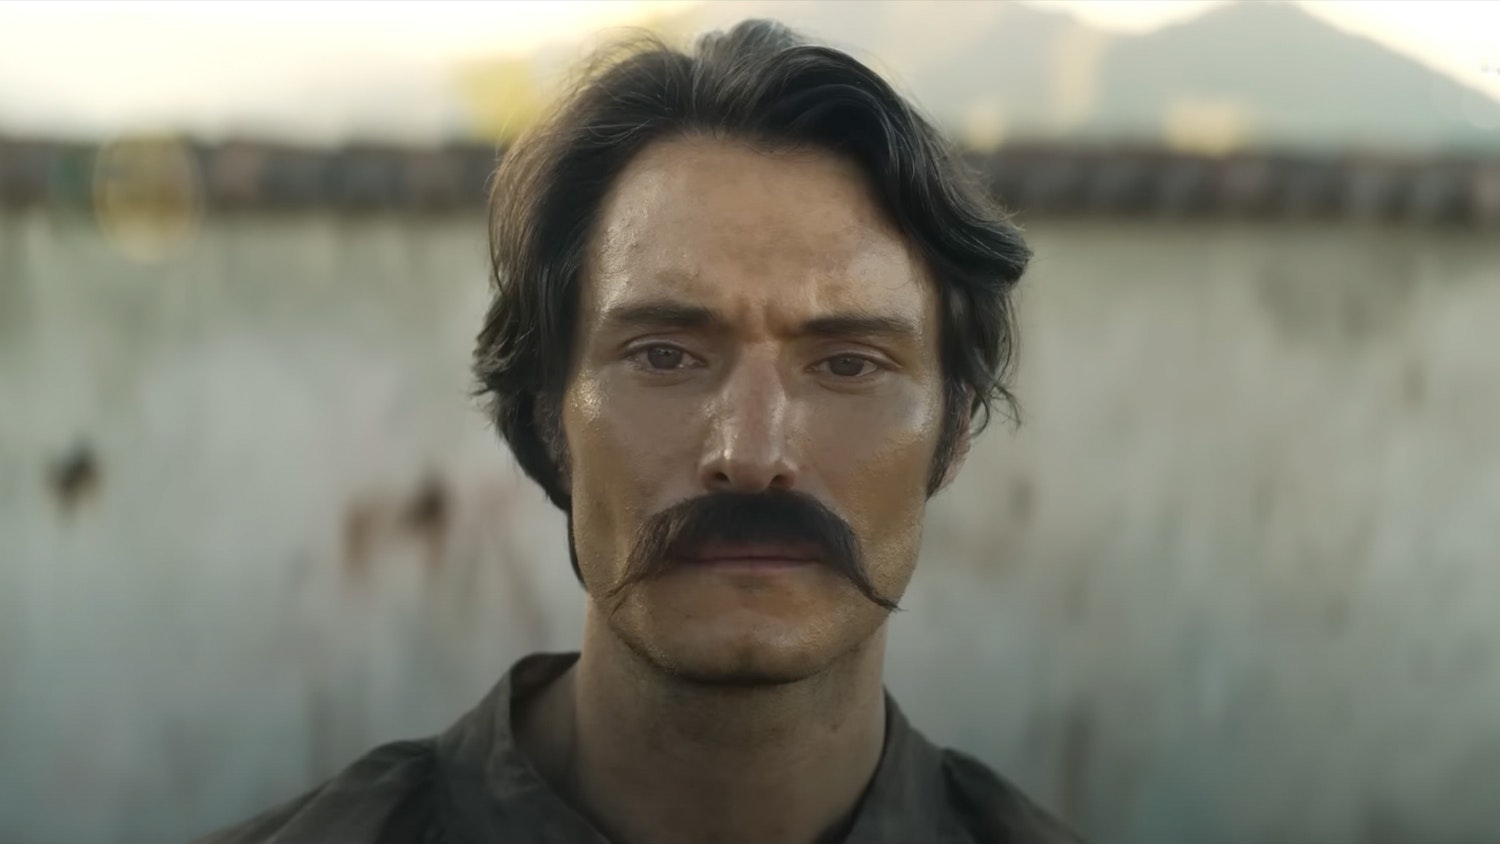 One Hundred Years Of Solitude Trailer: Netflix Adaptation Conjures Magical Realism